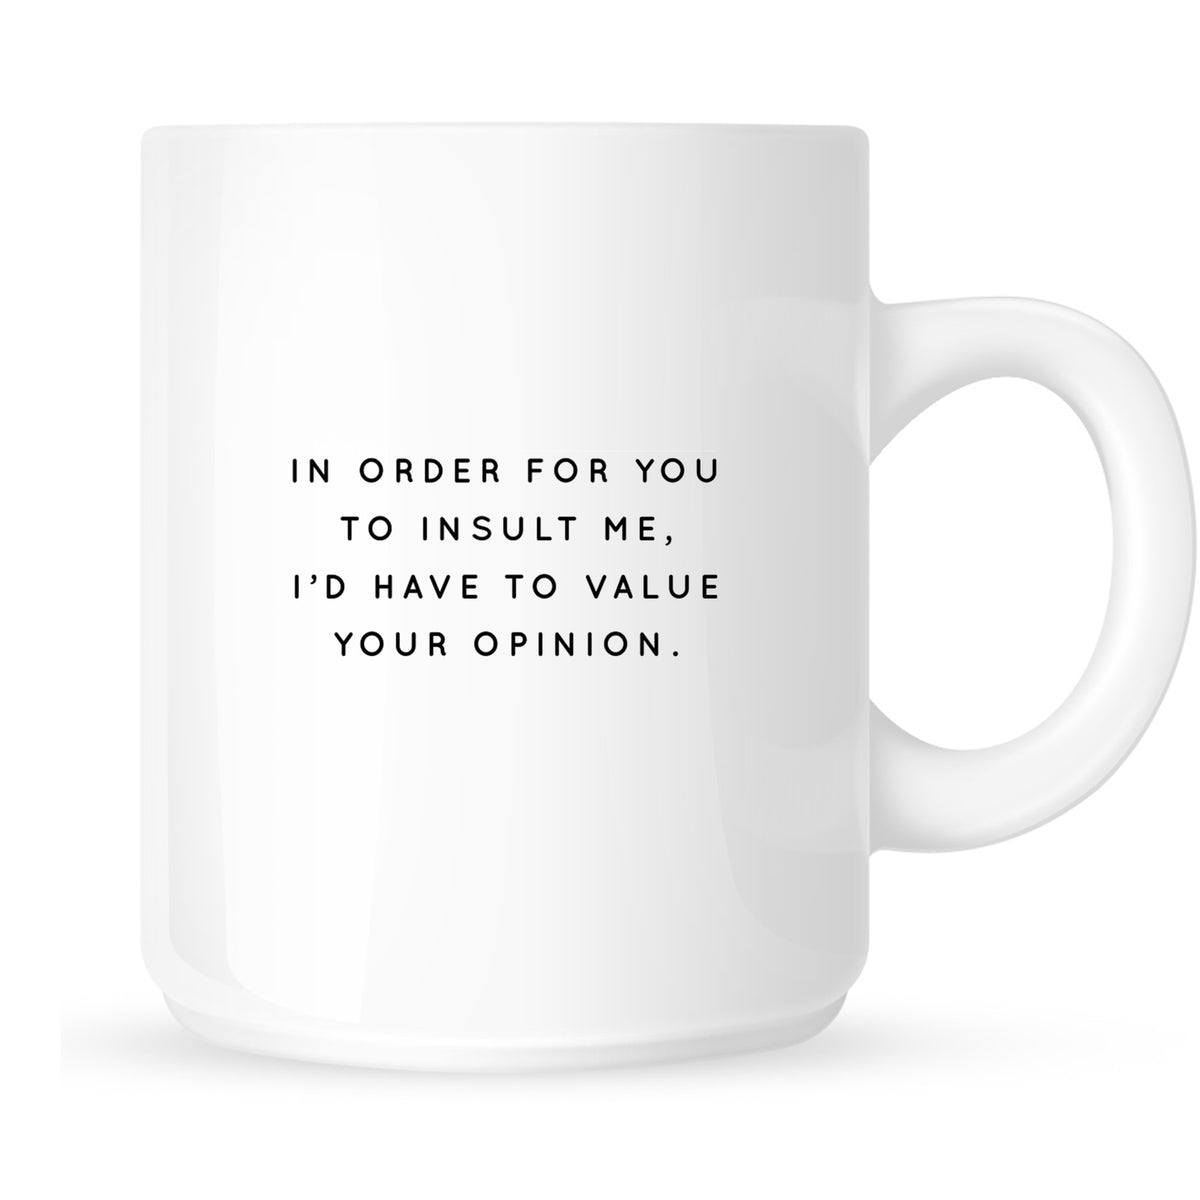 Mug - In Order for You to Insult Me I'd Have to Value Your Opinion